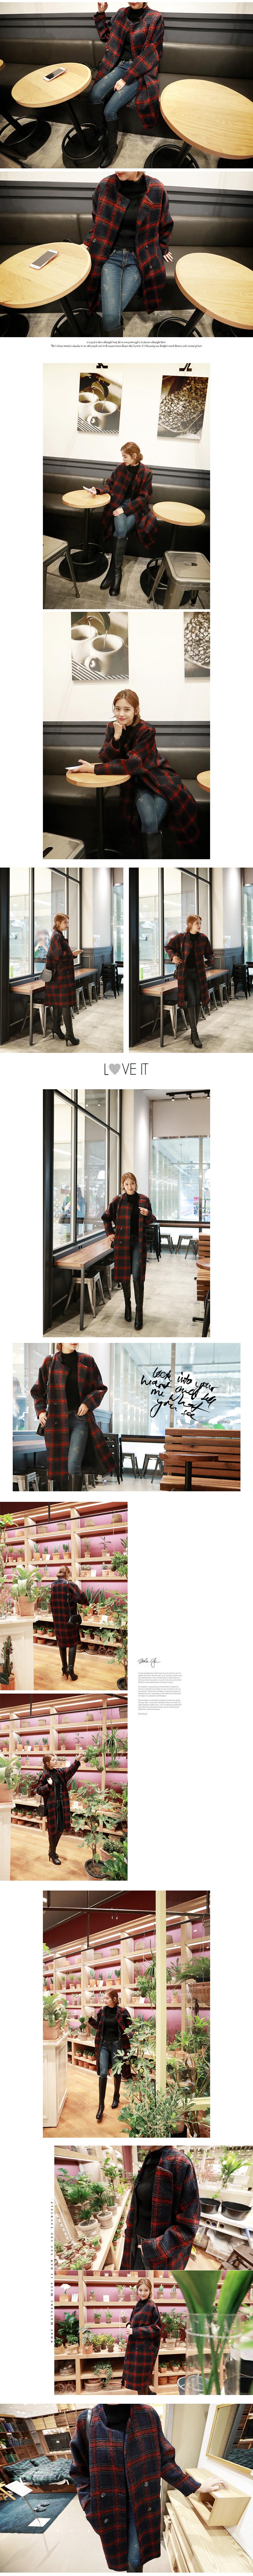 KOREA Oversized Double Breasted Checked Long Coat Red One Size(Free) [Free Shipping]